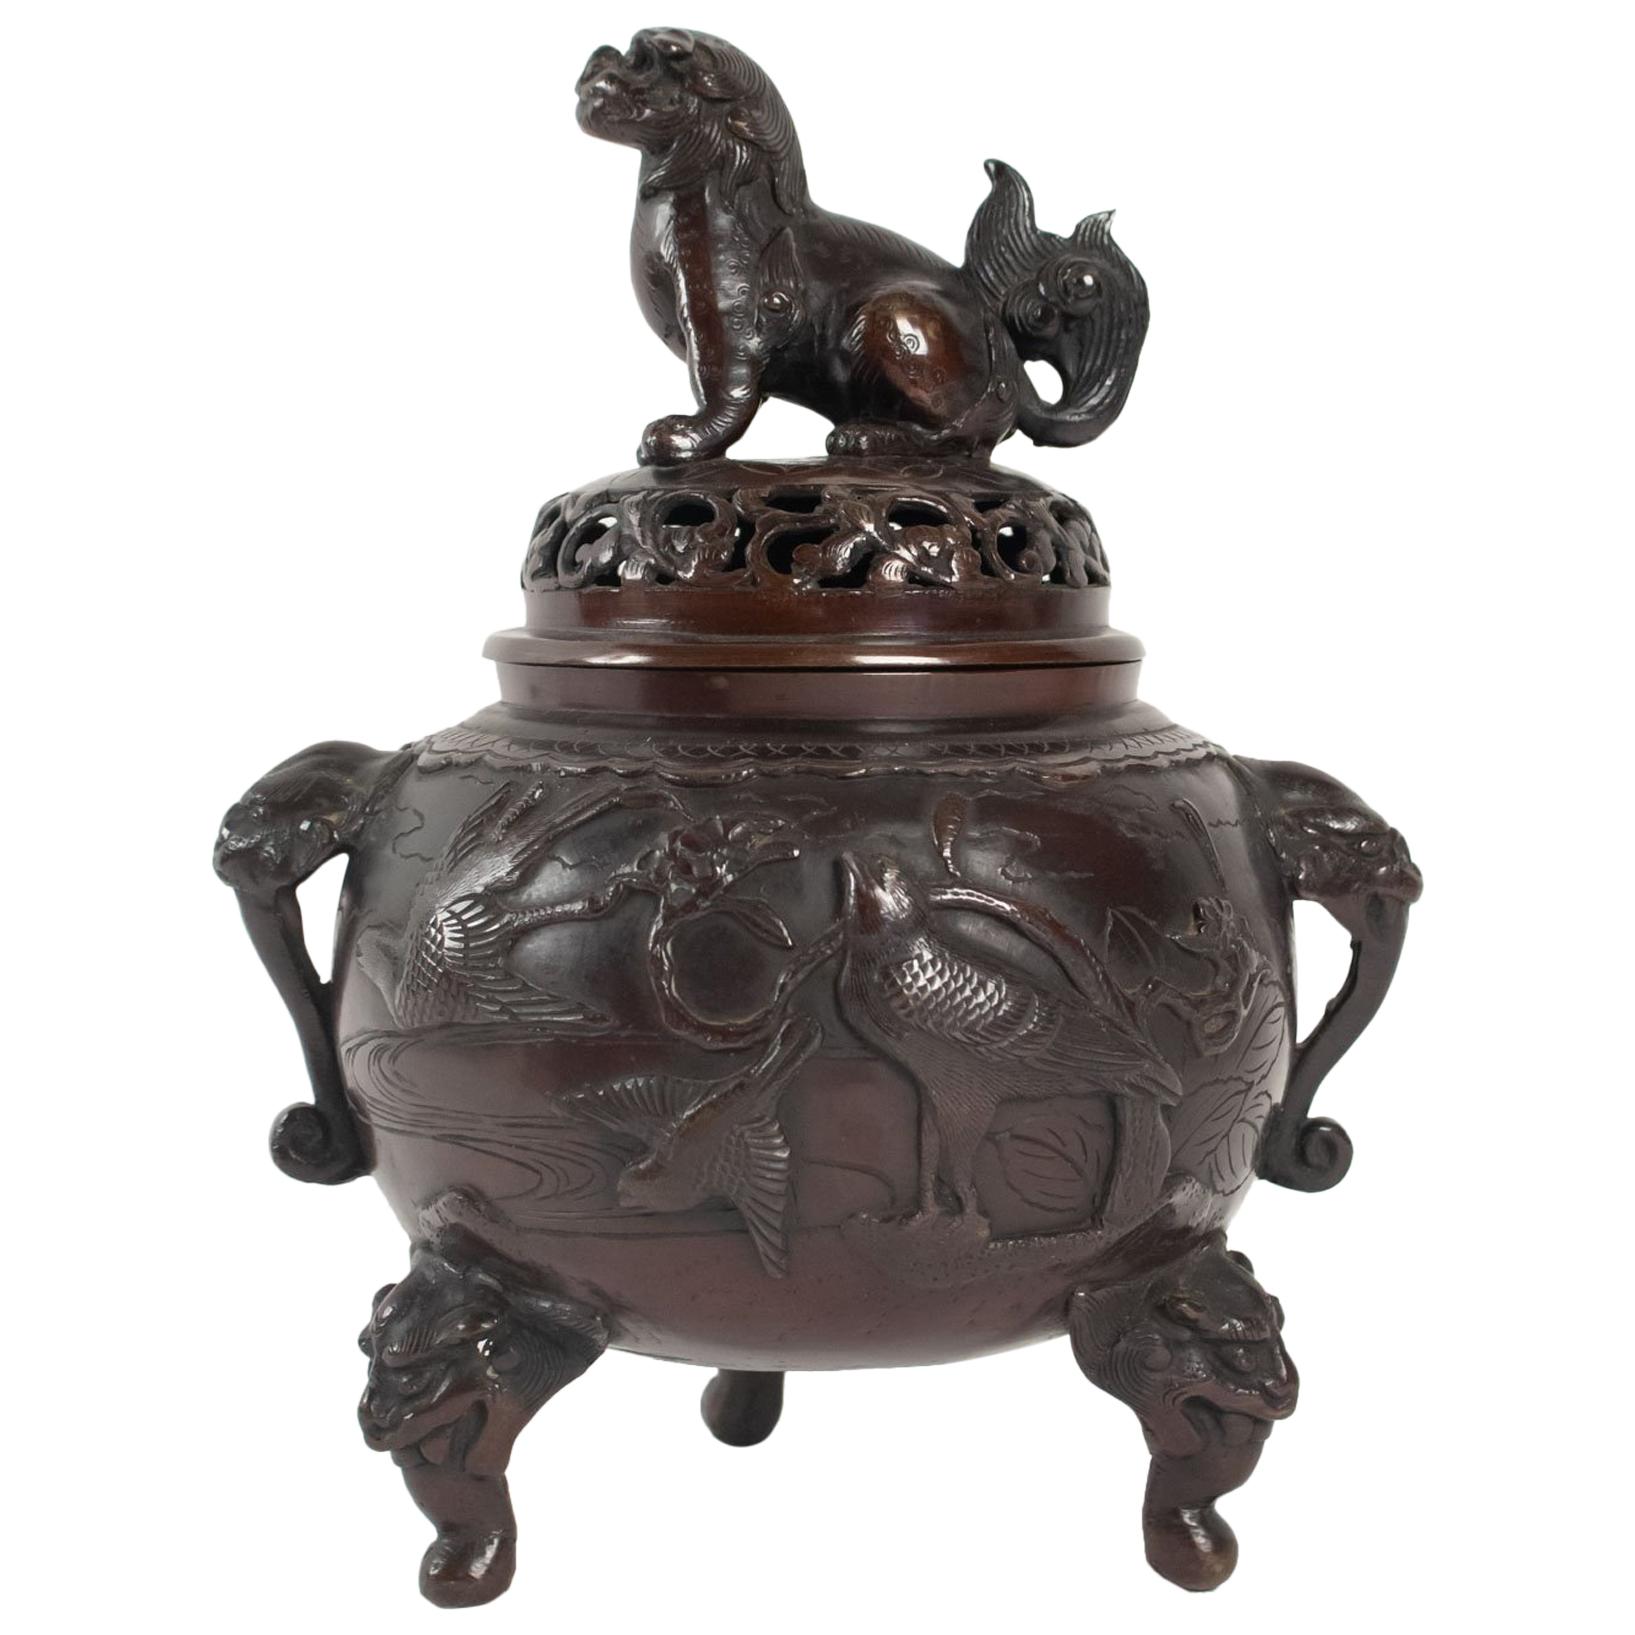 Small Burning Bronze Perfume with Brown Patina Decor Cranes in Clouds